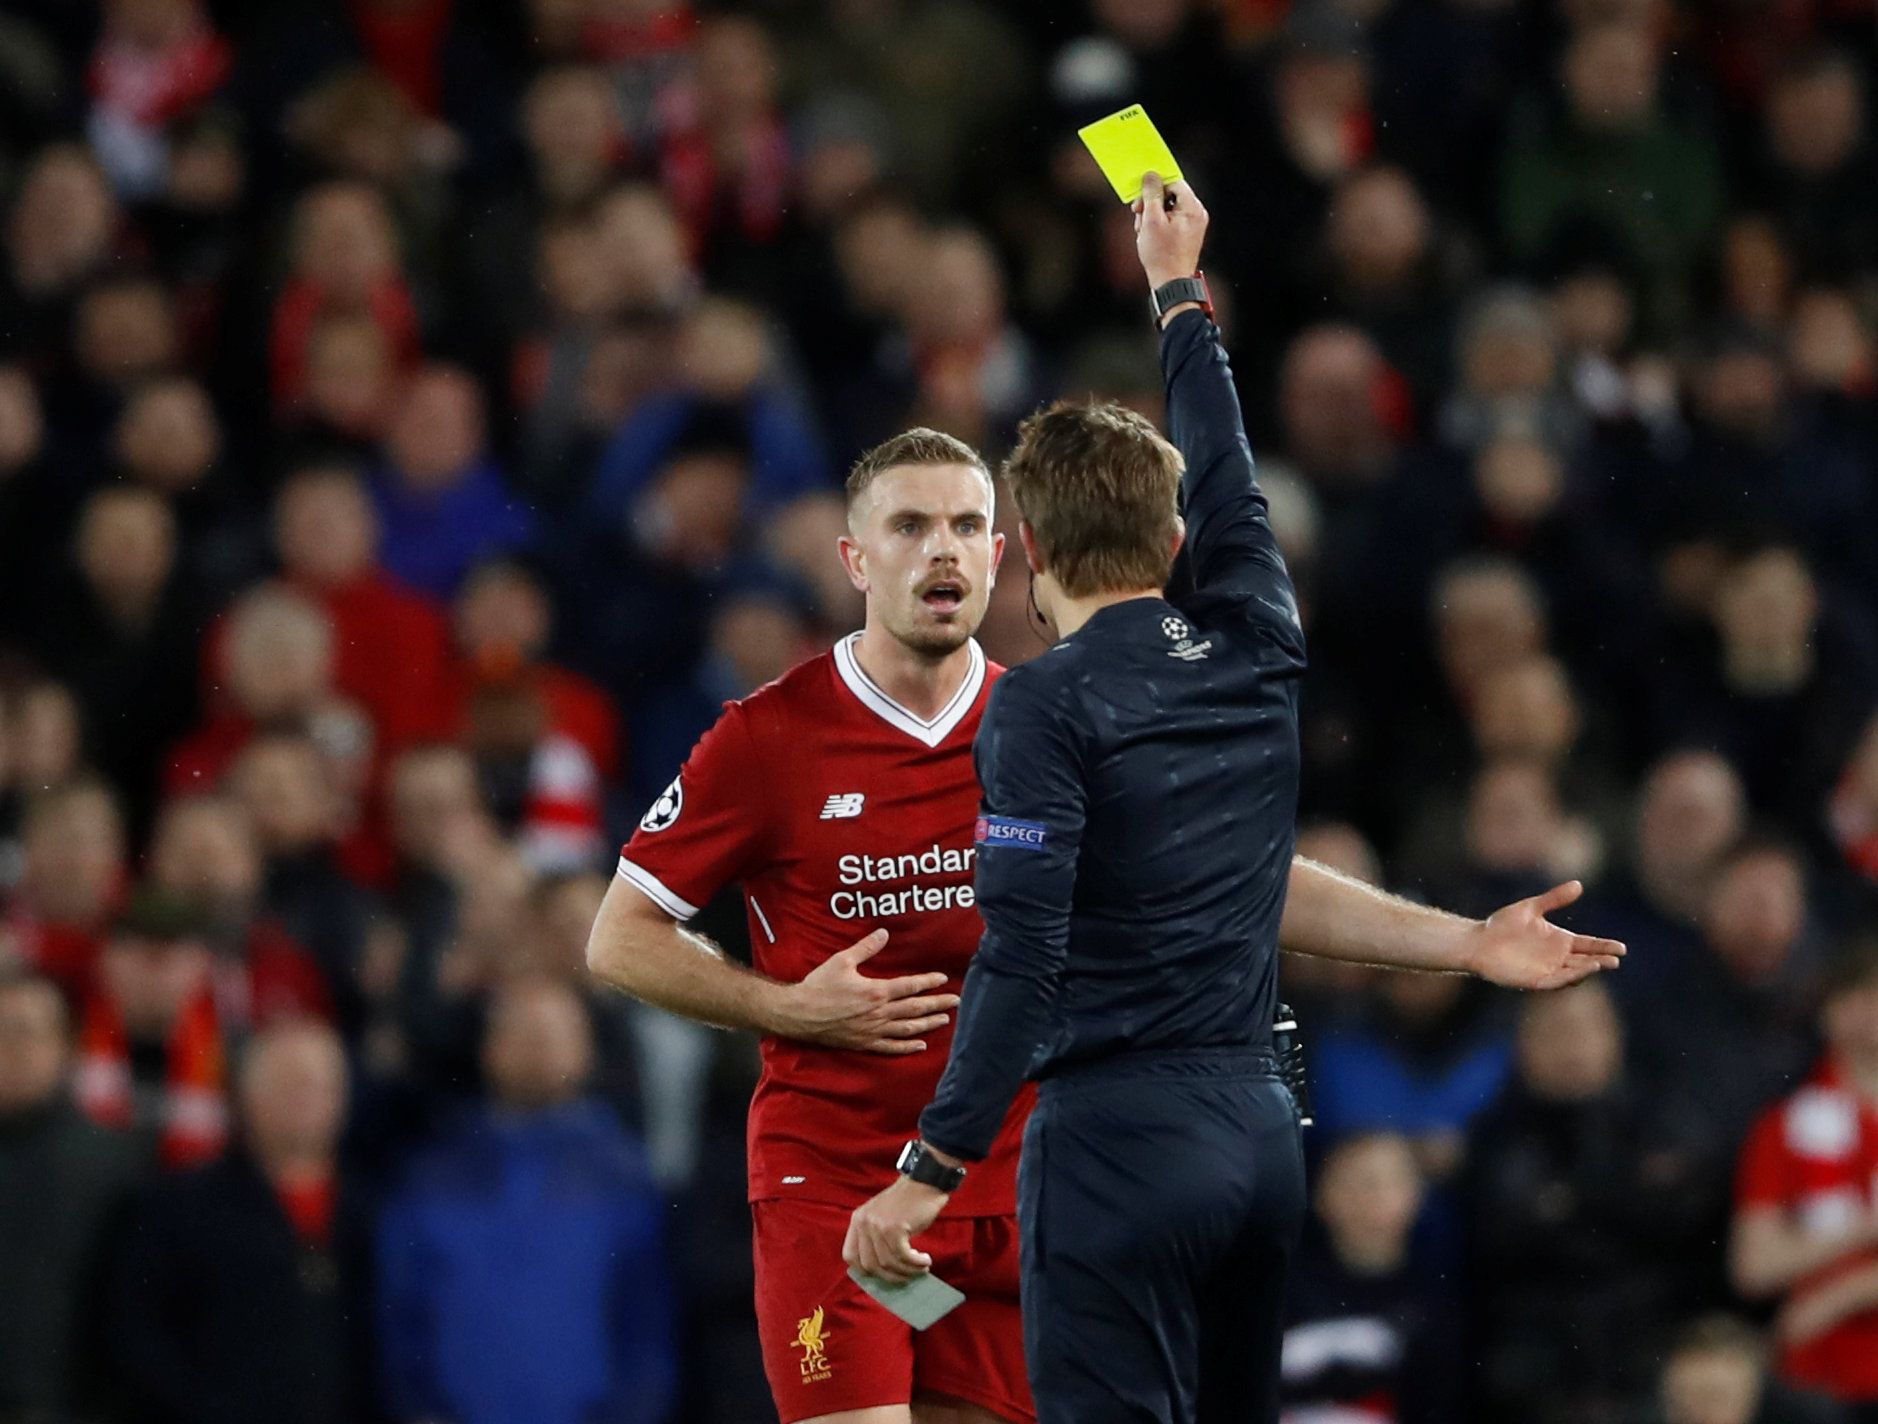 Soccer Football - Champions League Quarter Final First Leg - Liverpool vs Manchester City - Anfield, Liverpool, Britain - April 4, 2018   Liverpool's Jordan Henderson is shown a yellow card by referee Felix Brych    Action Images via Reuters/Carl Recine